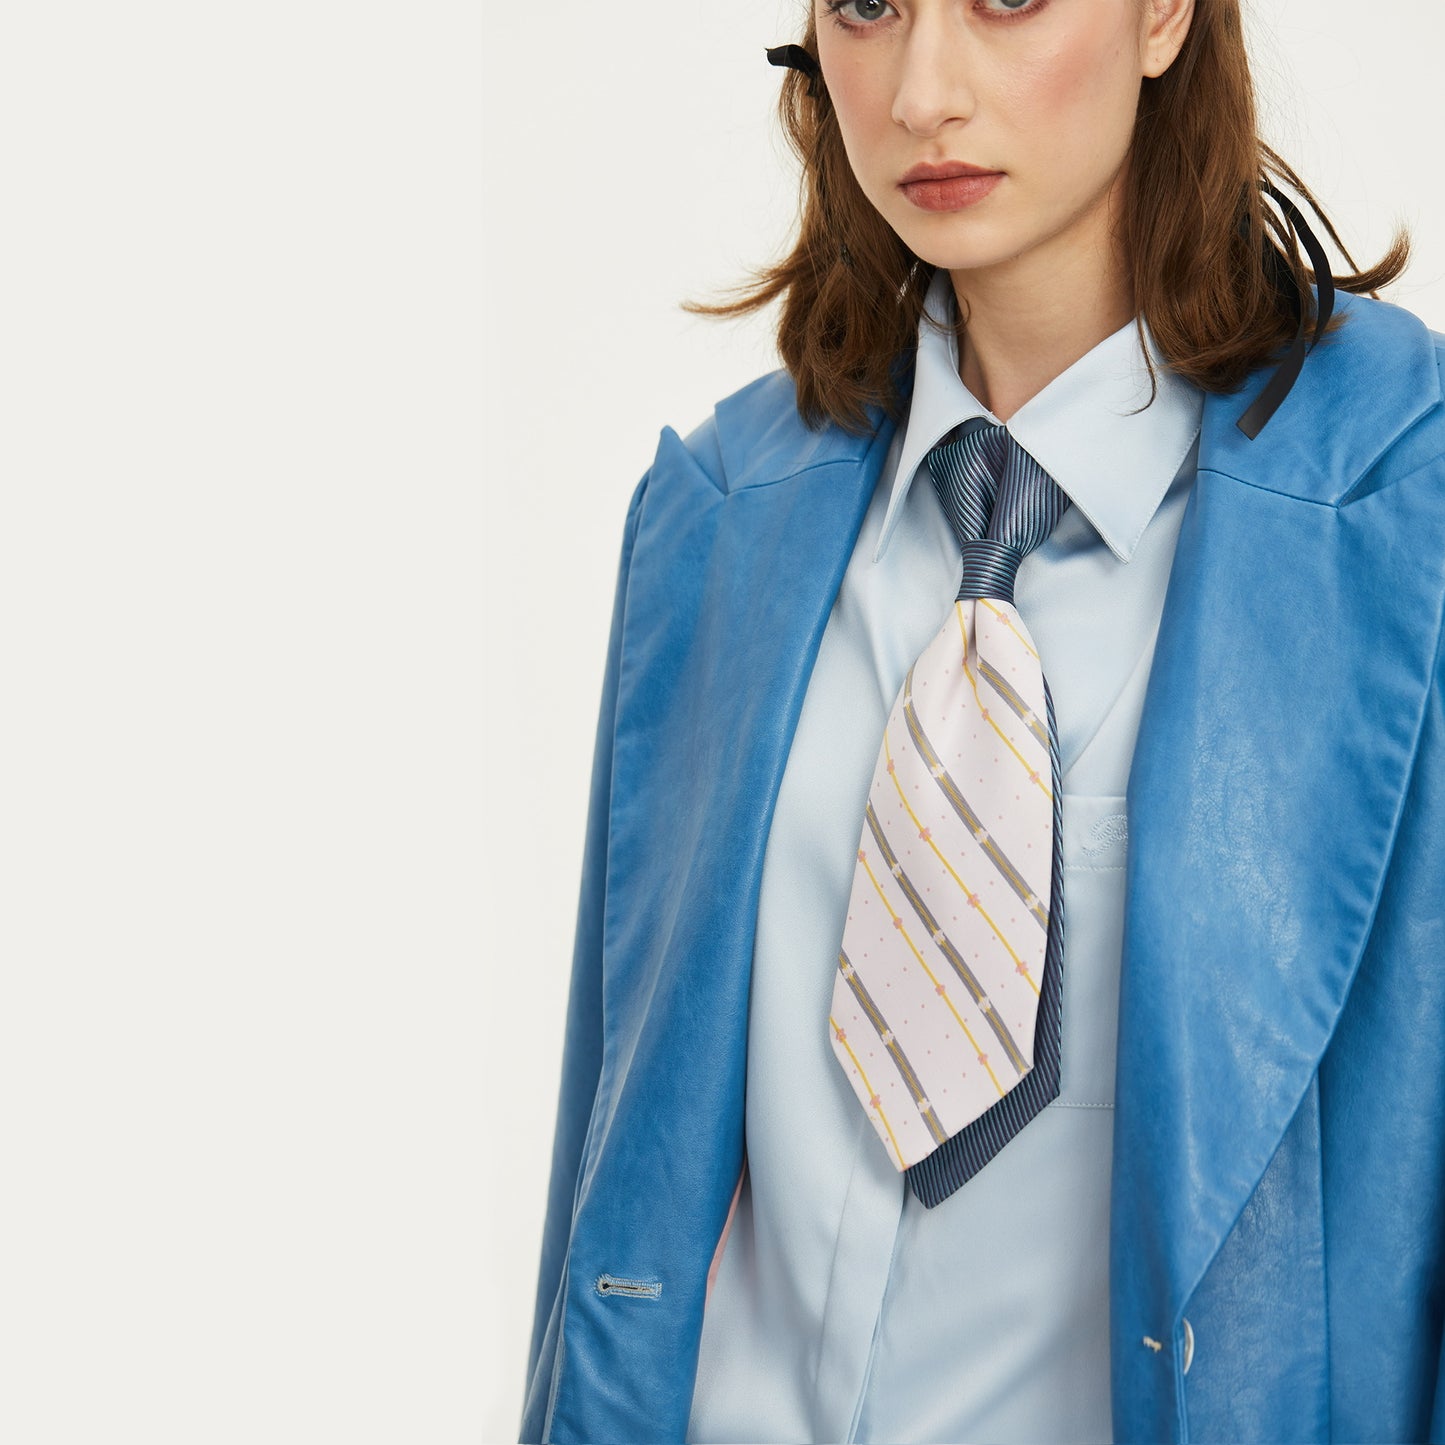 Bianca Lether Suit in Blue